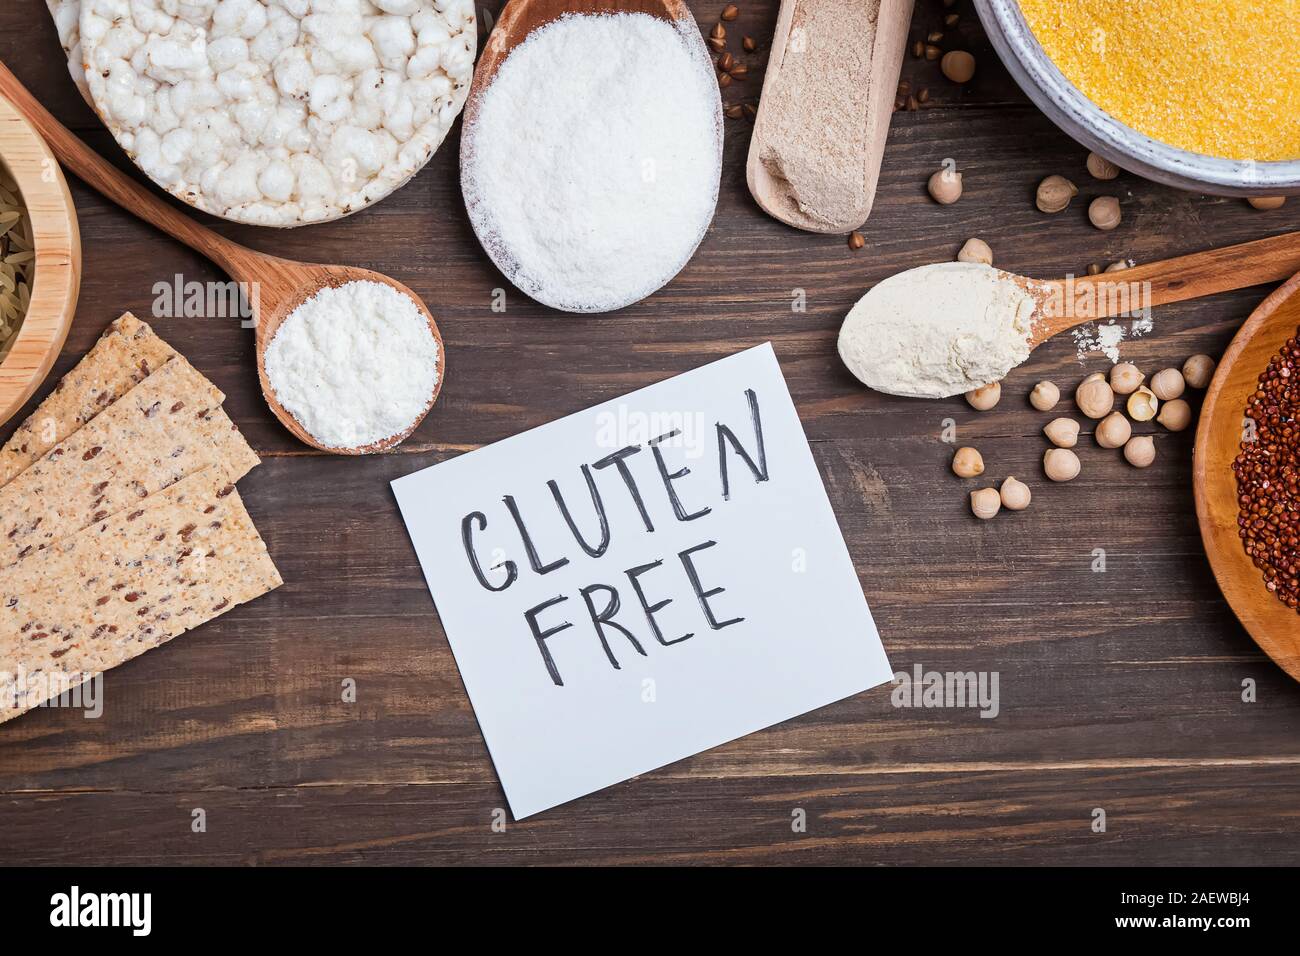 Gluten free grains and alternative flour products. Ingredient for bakery on the wooden table, top view. Stock Photo